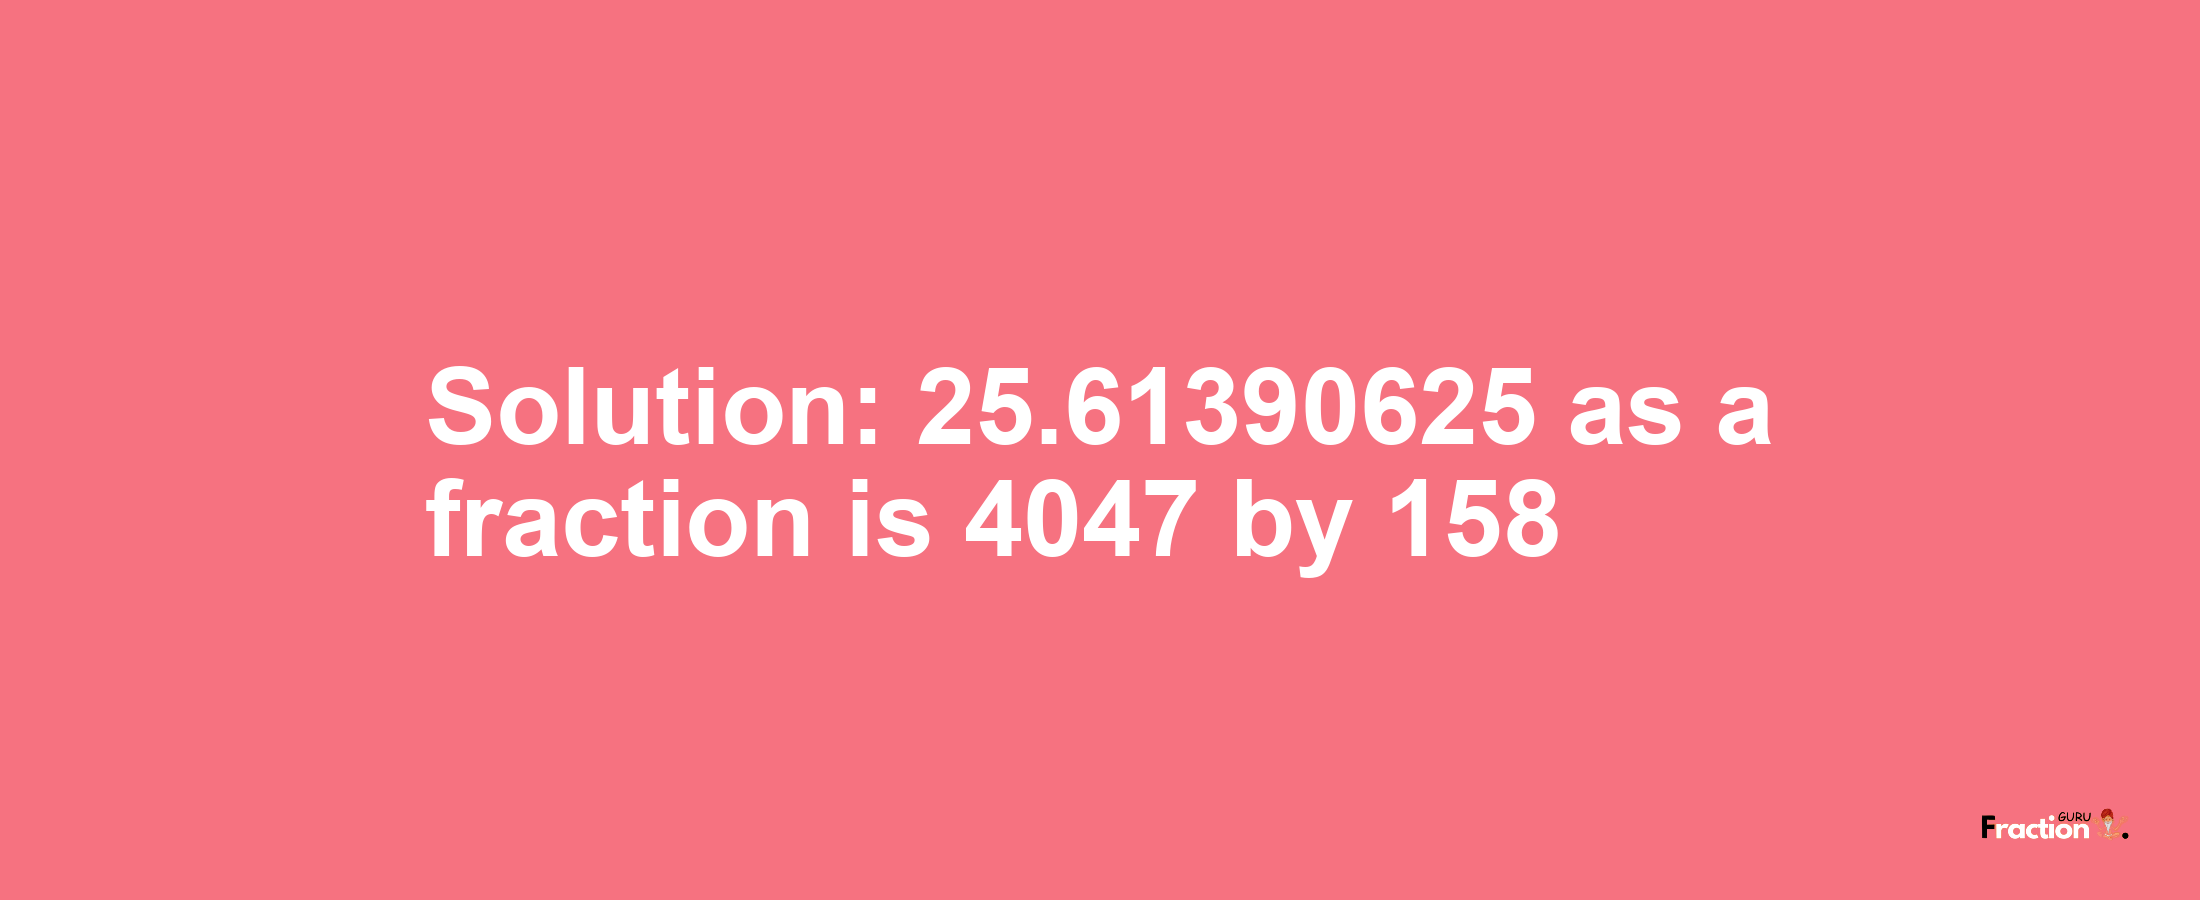 Solution:25.61390625 as a fraction is 4047/158